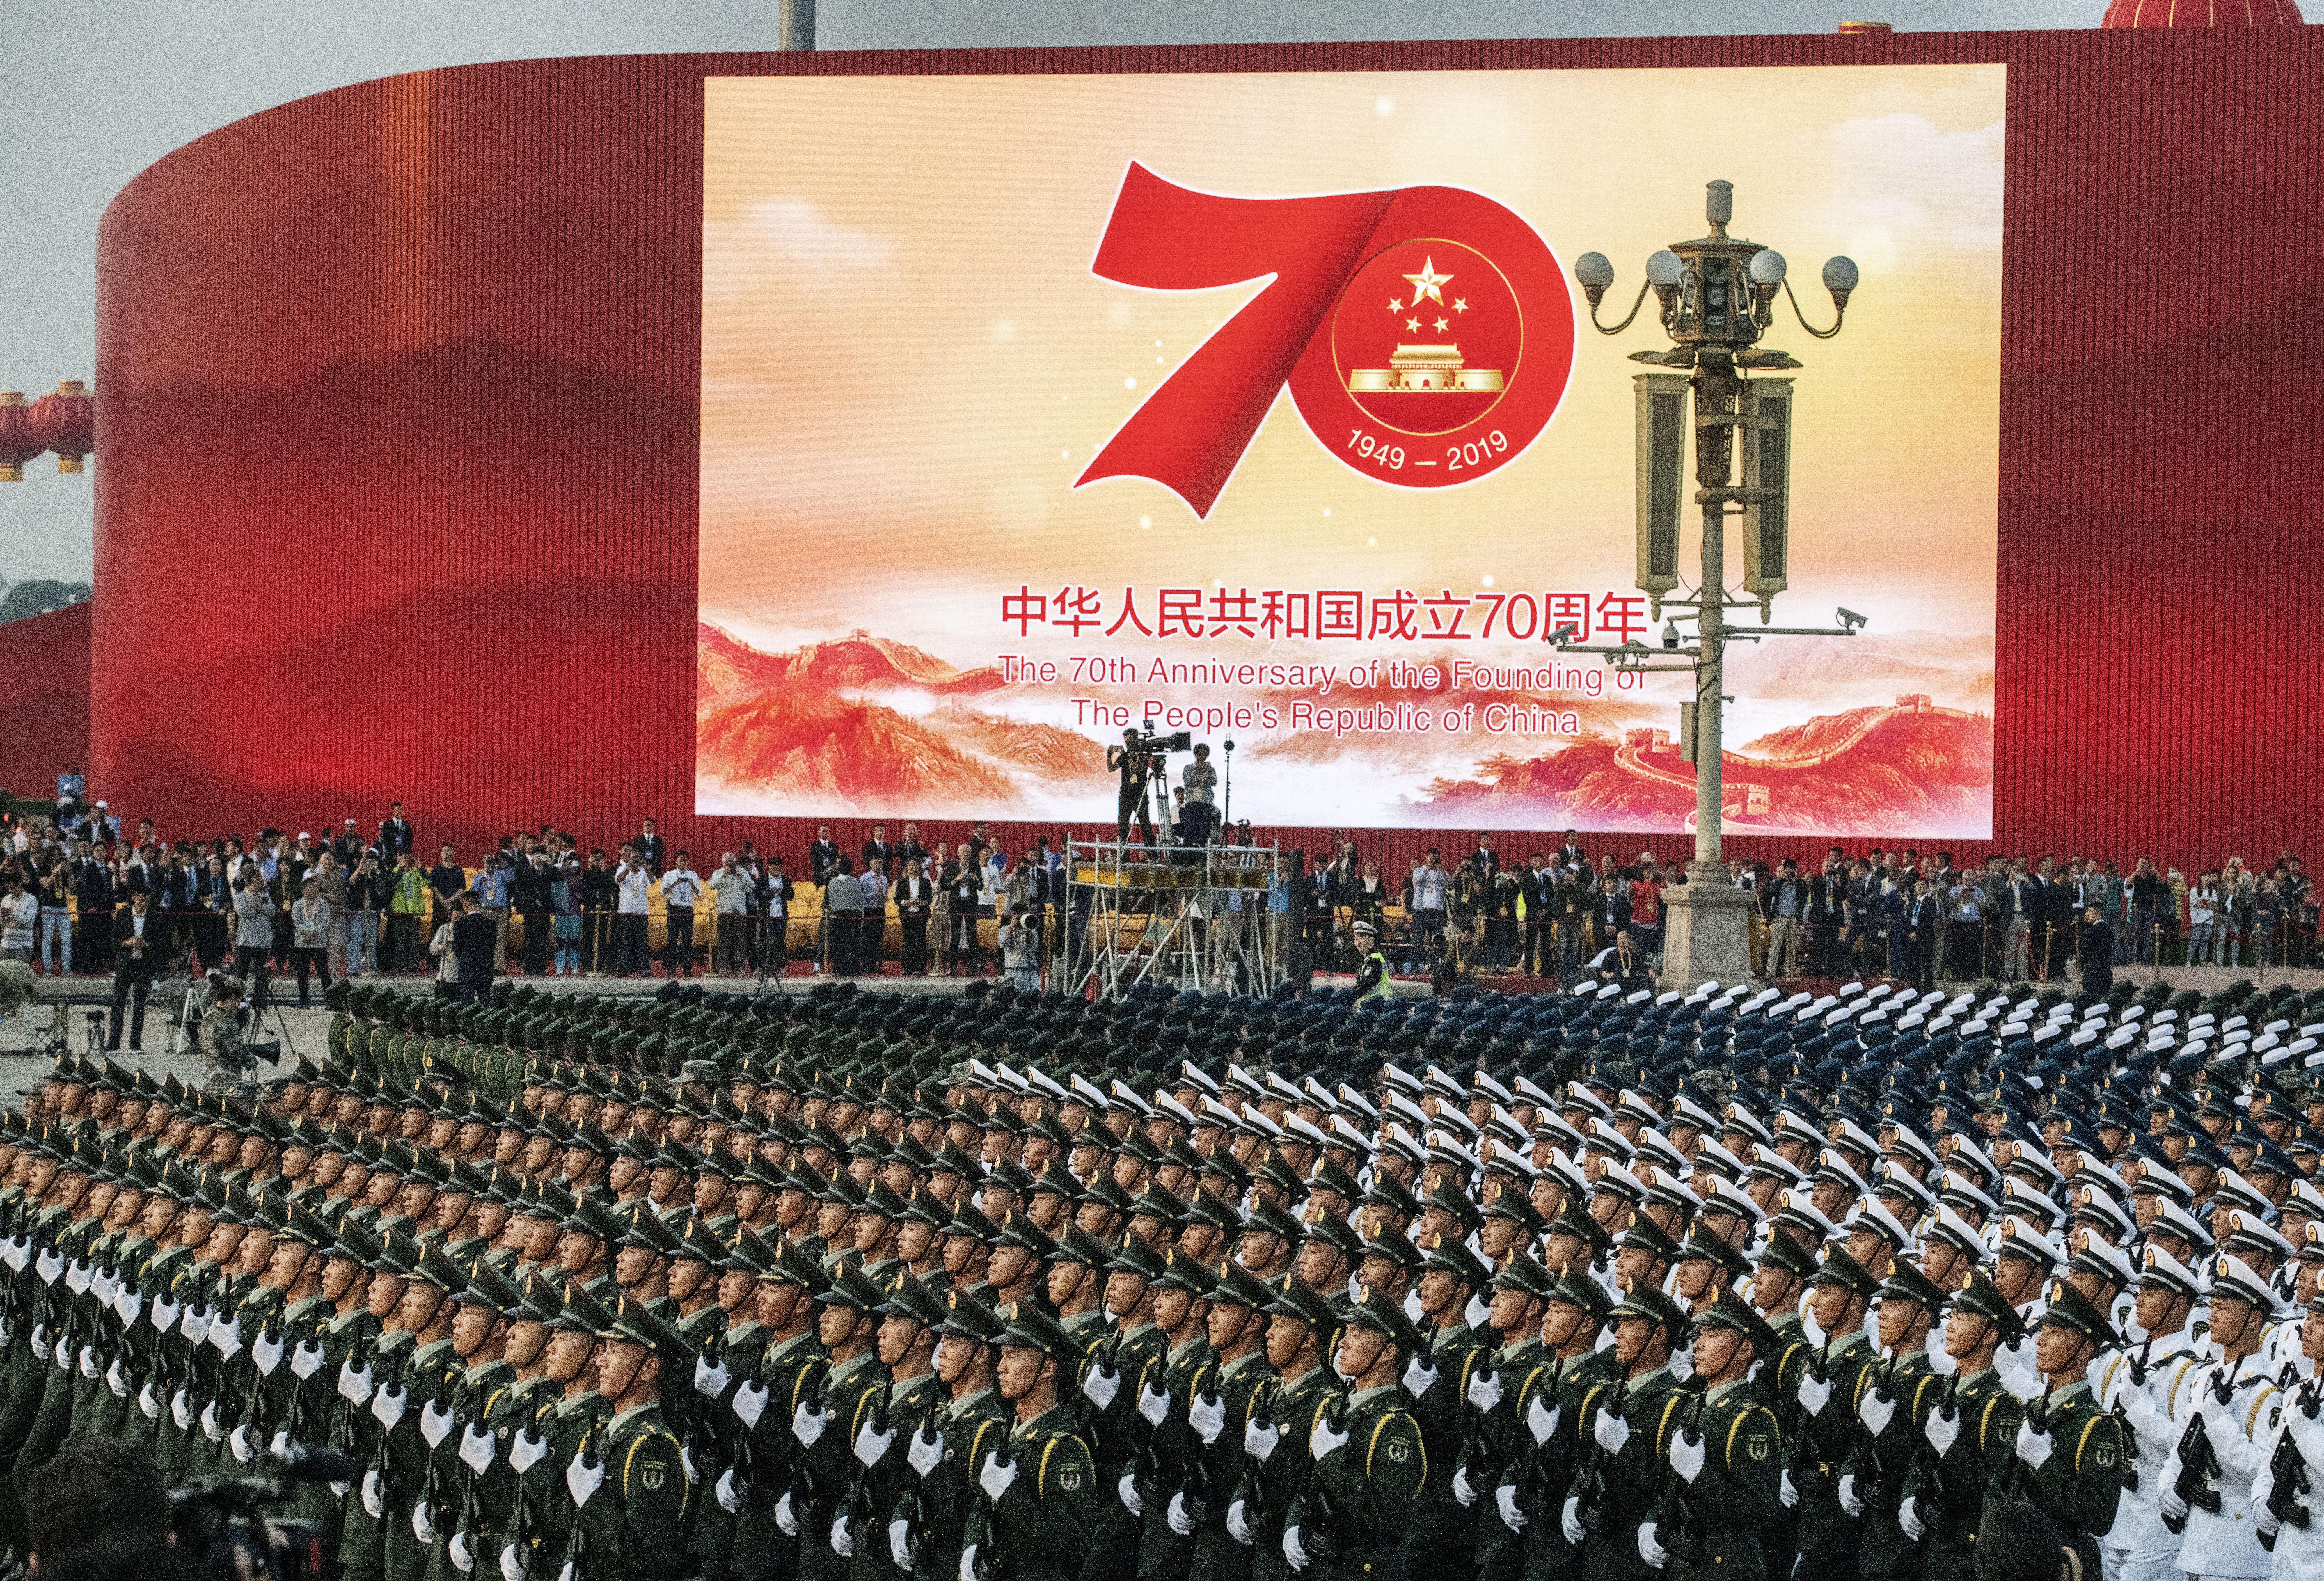 Chinese military marchto celebrate the 70th Anniversary of the founding of the People's Republic of China at Tiananmen Square on October 1, 2019 in Beijing, China. 